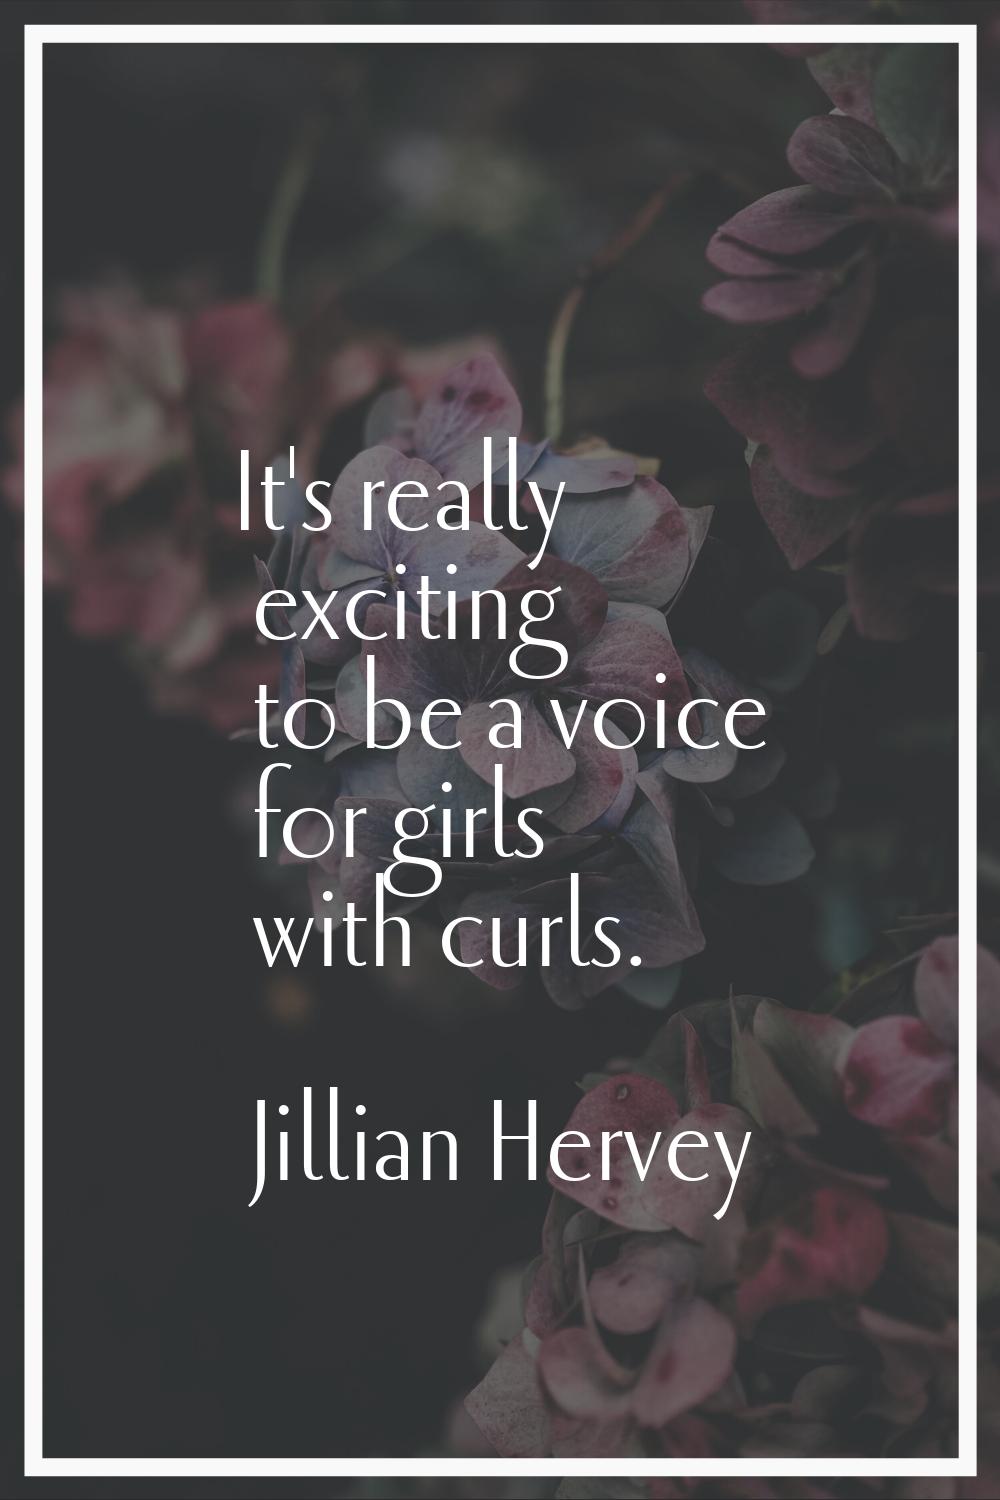 It's really exciting to be a voice for girls with curls.